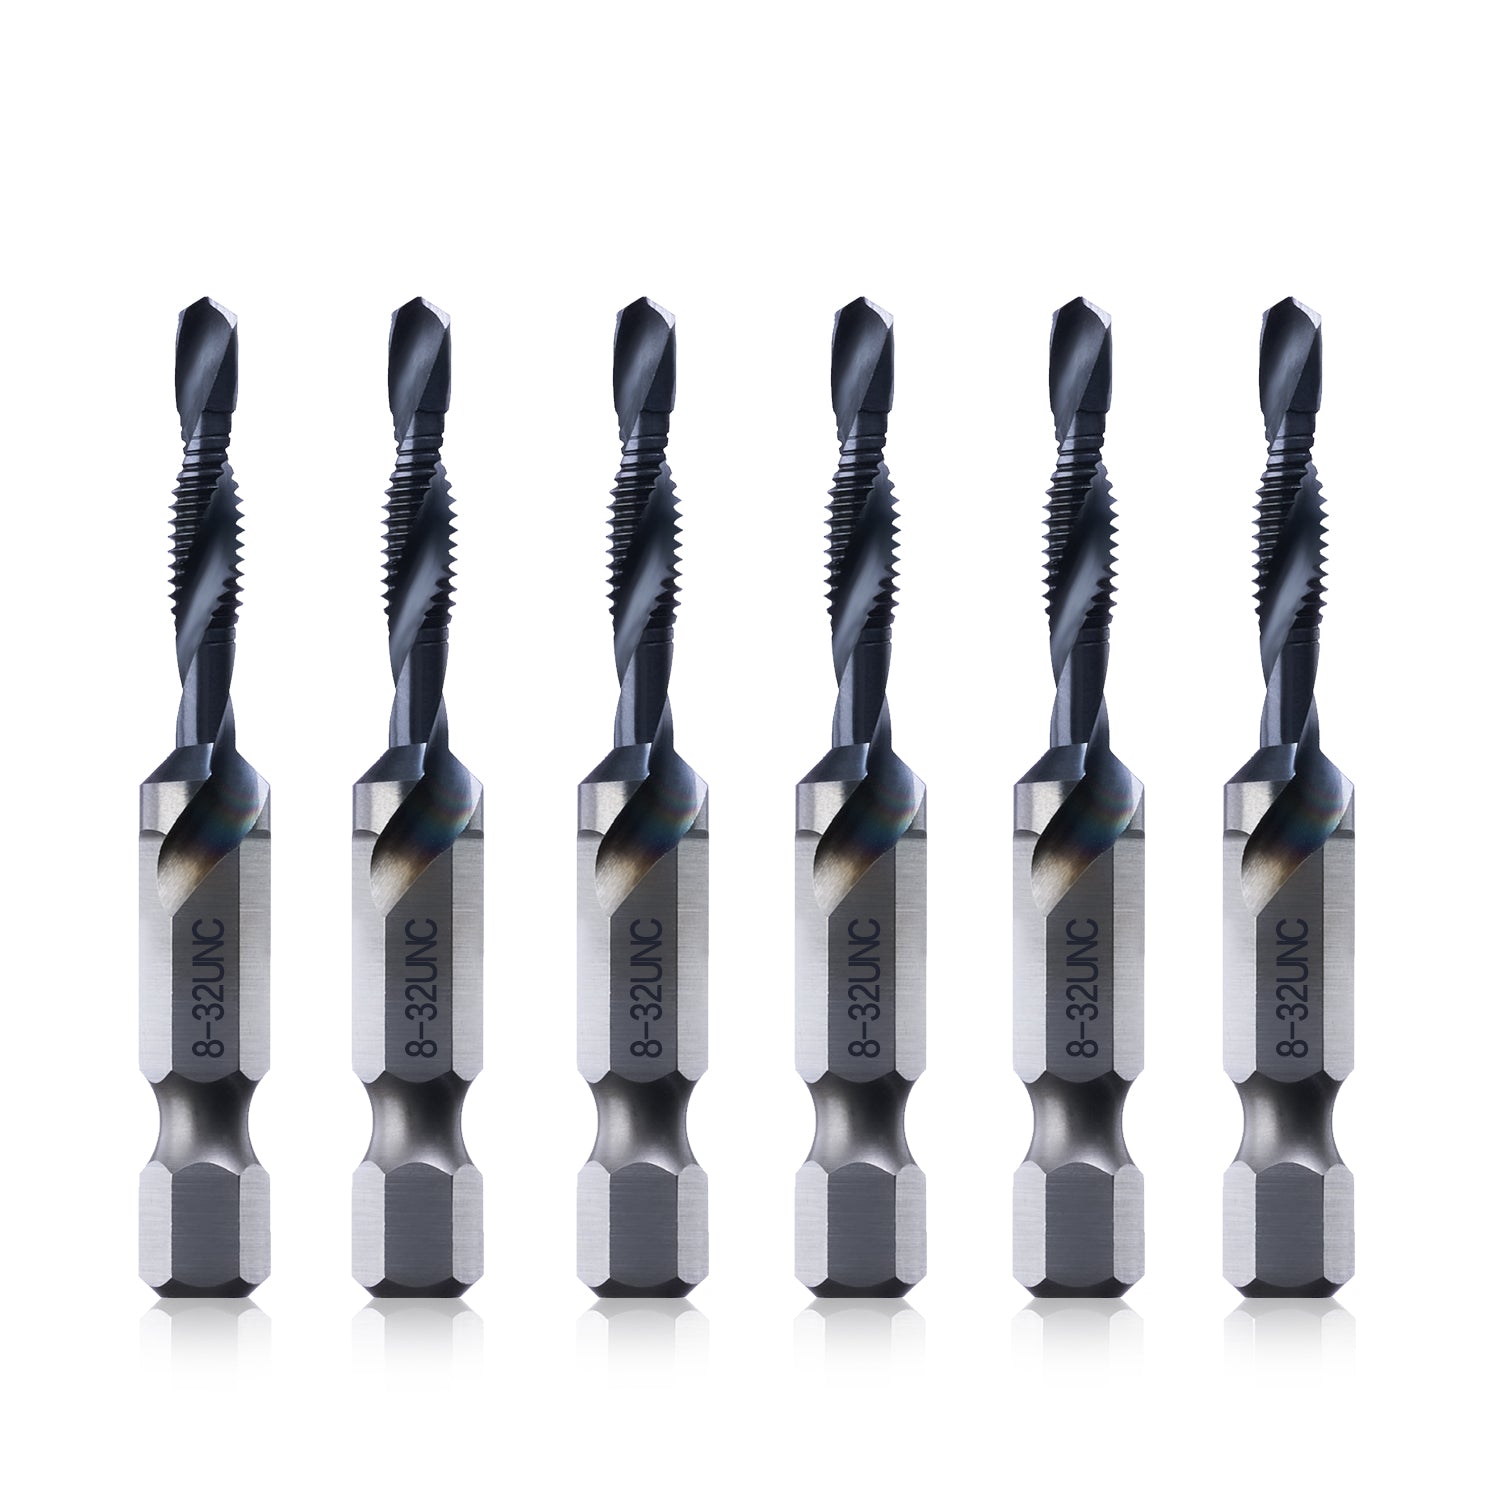 Metal security torx bits set with hole in center and hex shank